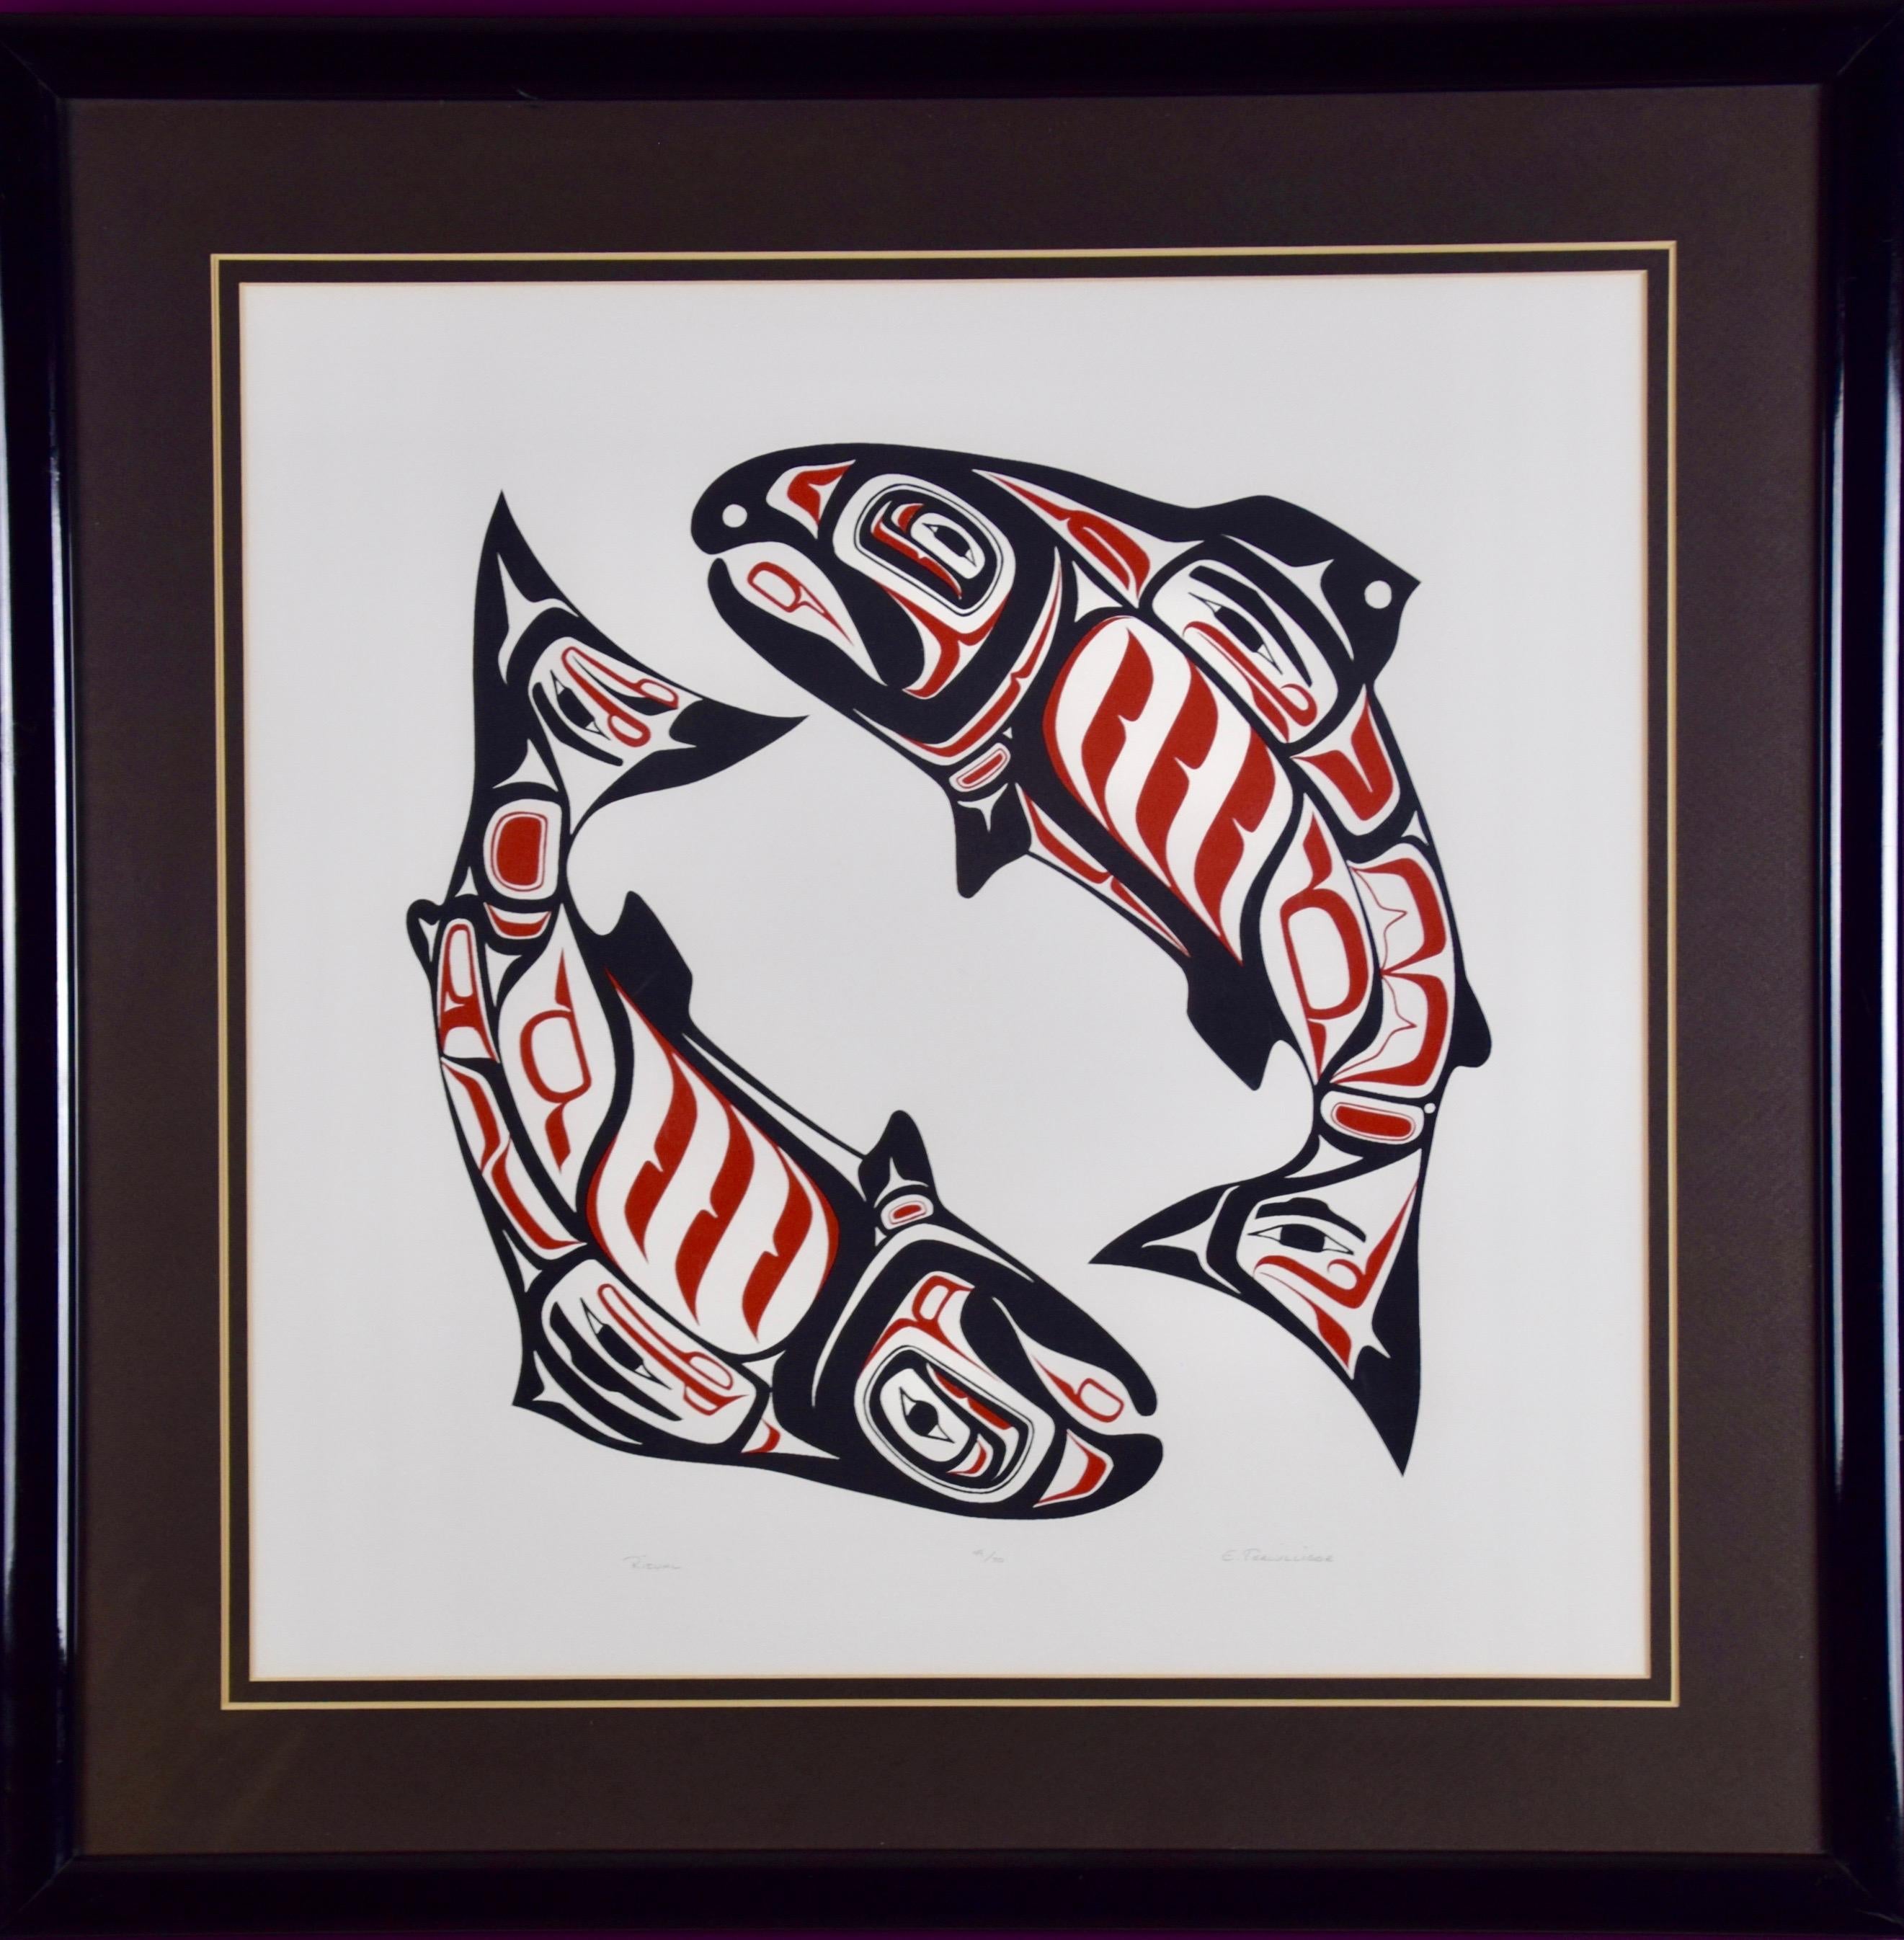  M. Shields   Figurative Print - An Inuit Abstract Stonecut Engraving of Salmon Fish entitled "Ritual"